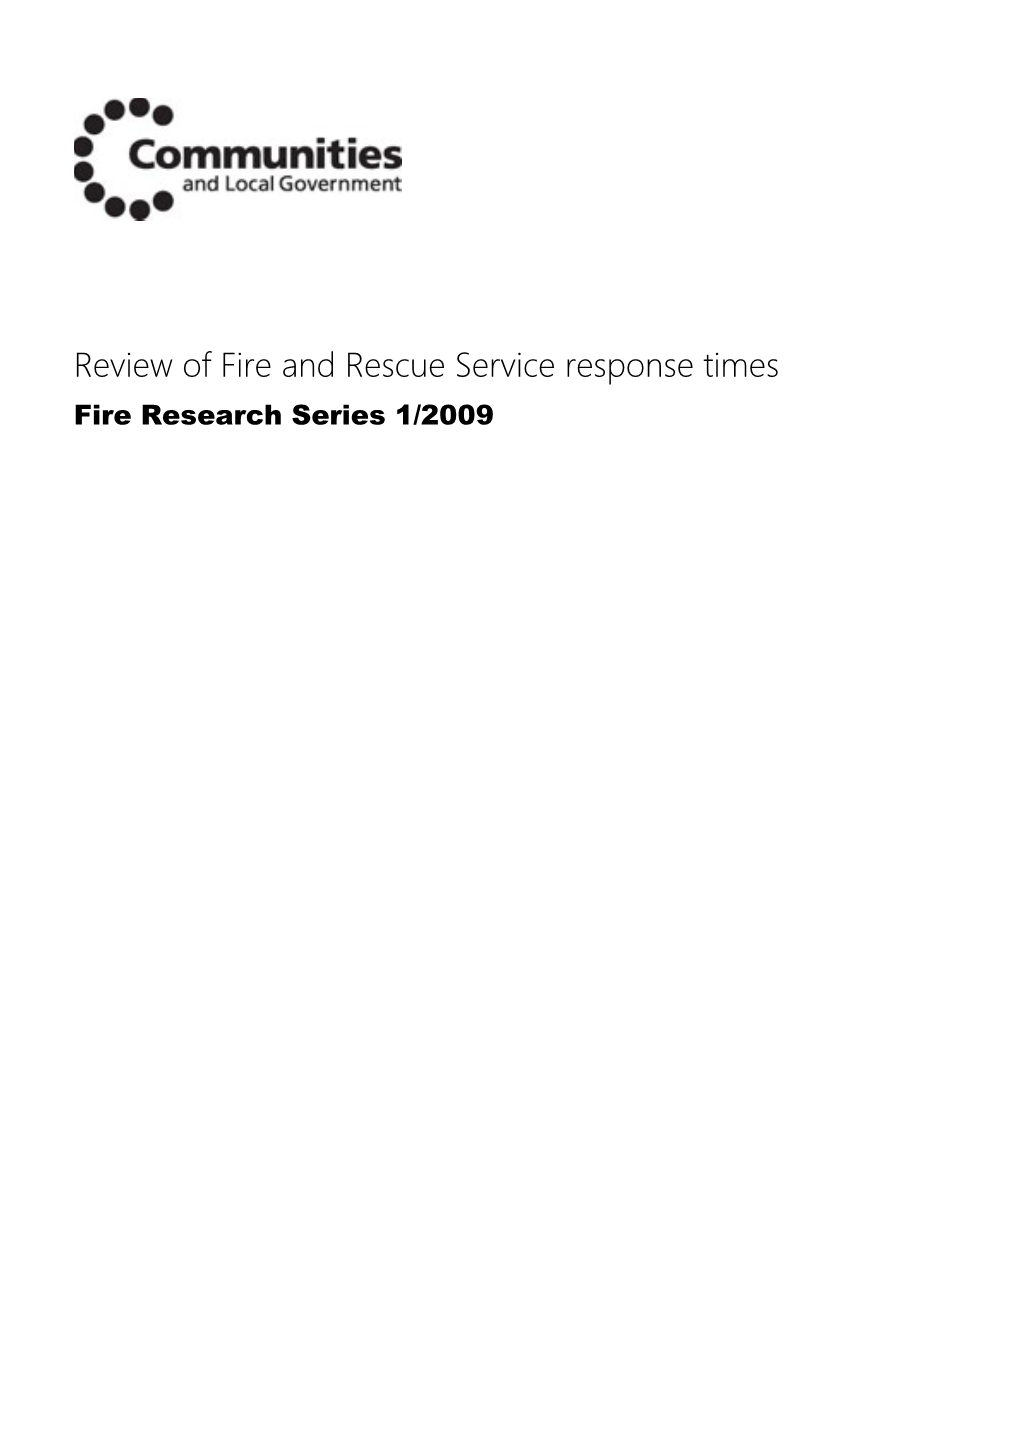 Review of Fire and Rescue Service Response Times